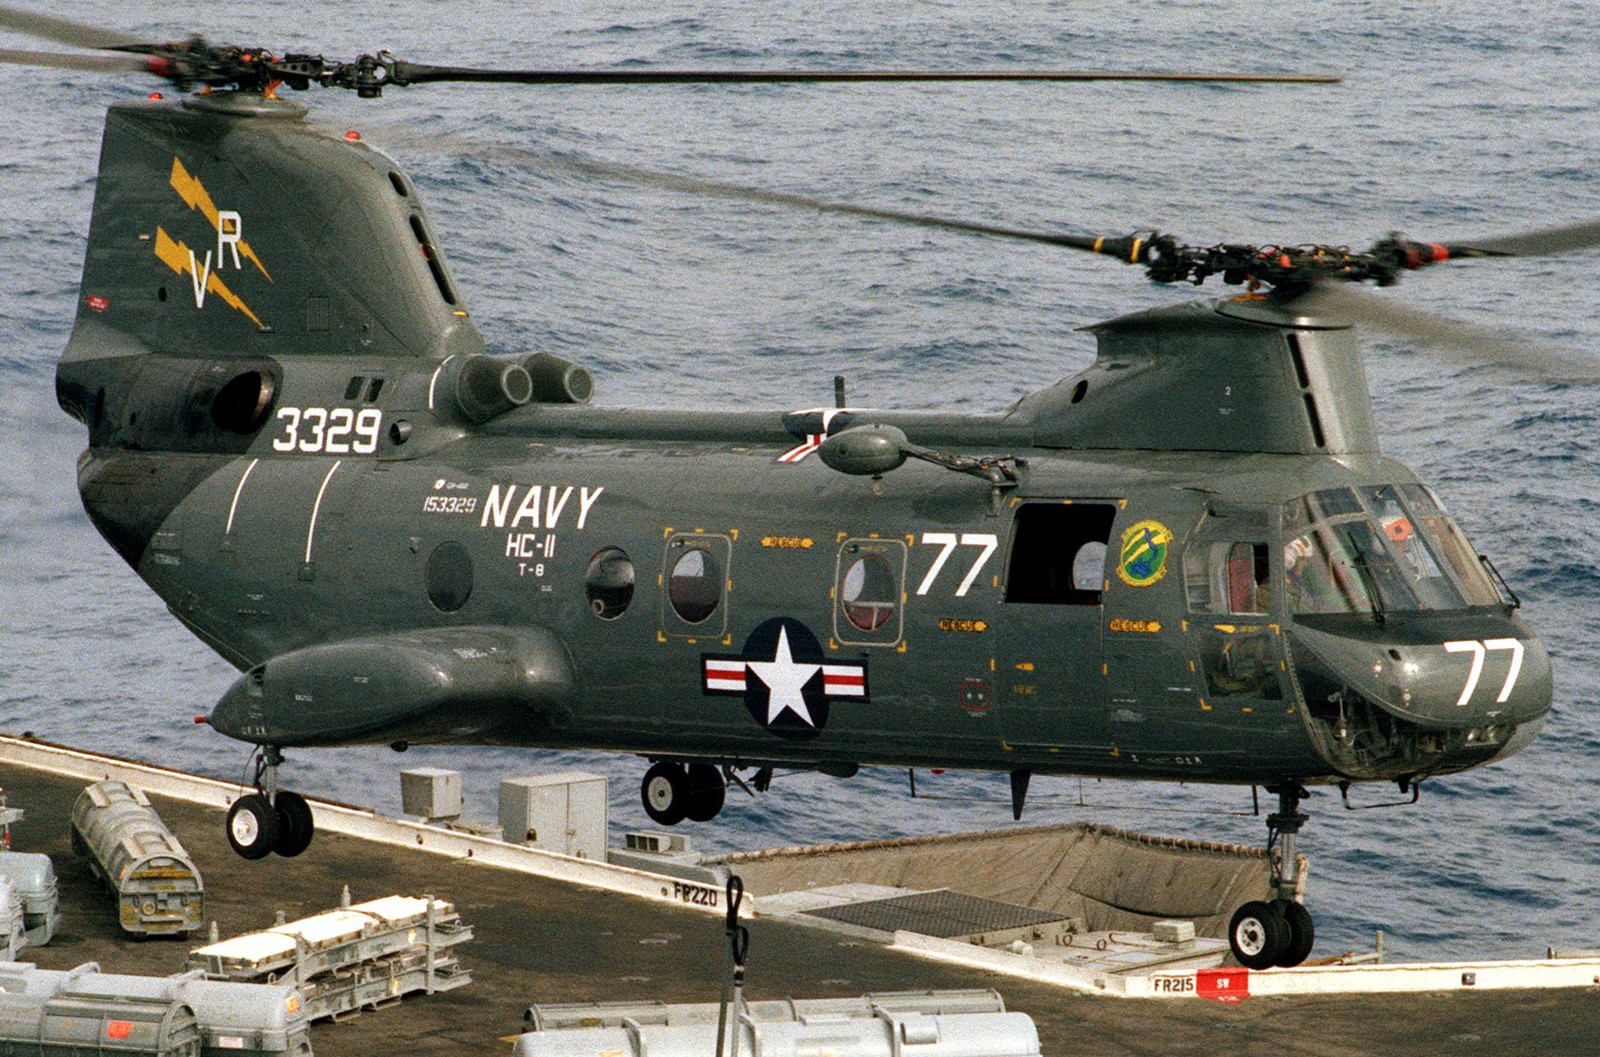 hc-11 gunbearers helicopter combat support squadron navy ch-46 sea knight 130